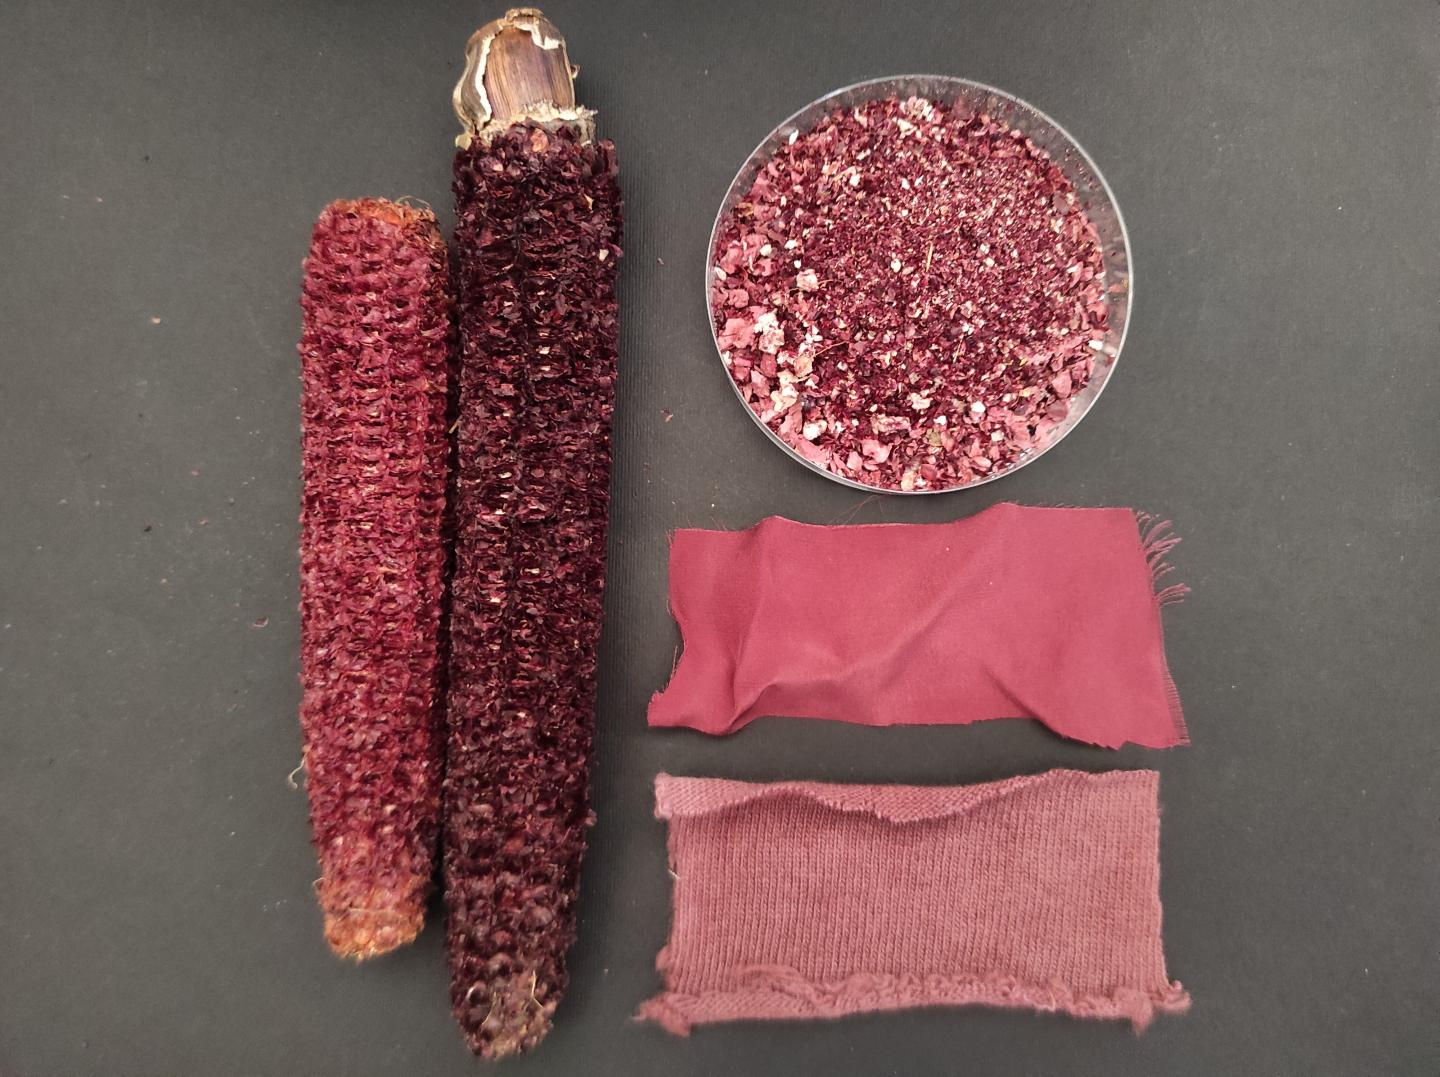 Waste from Making Purple Corn Chips Yields a Natural Dye, Supplements, Kitty Litter